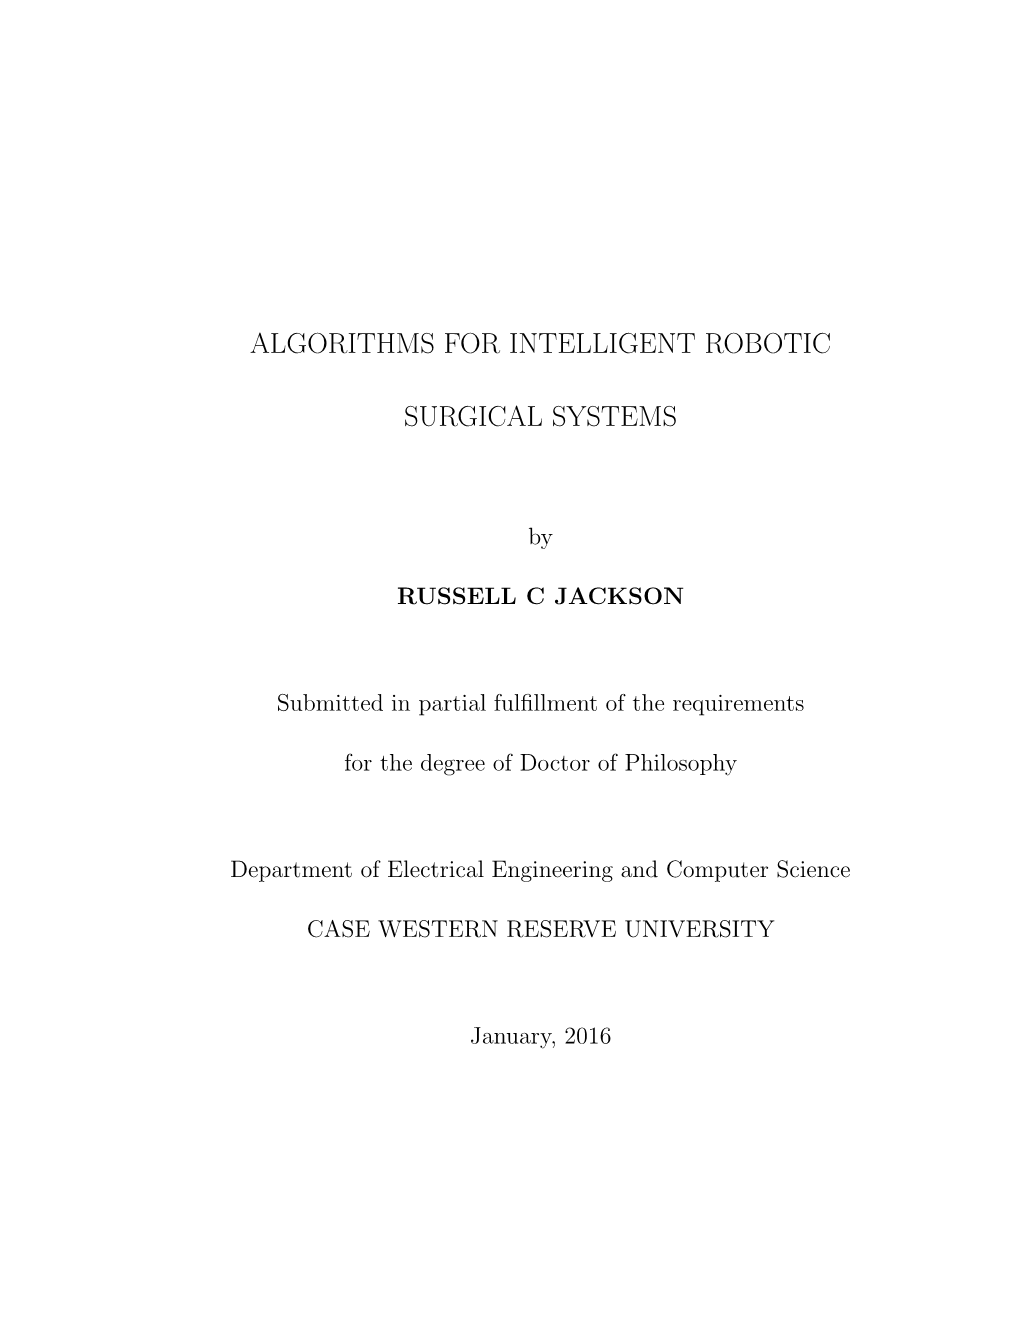 Algorithms for Intelligent Robotic Surgical Systems